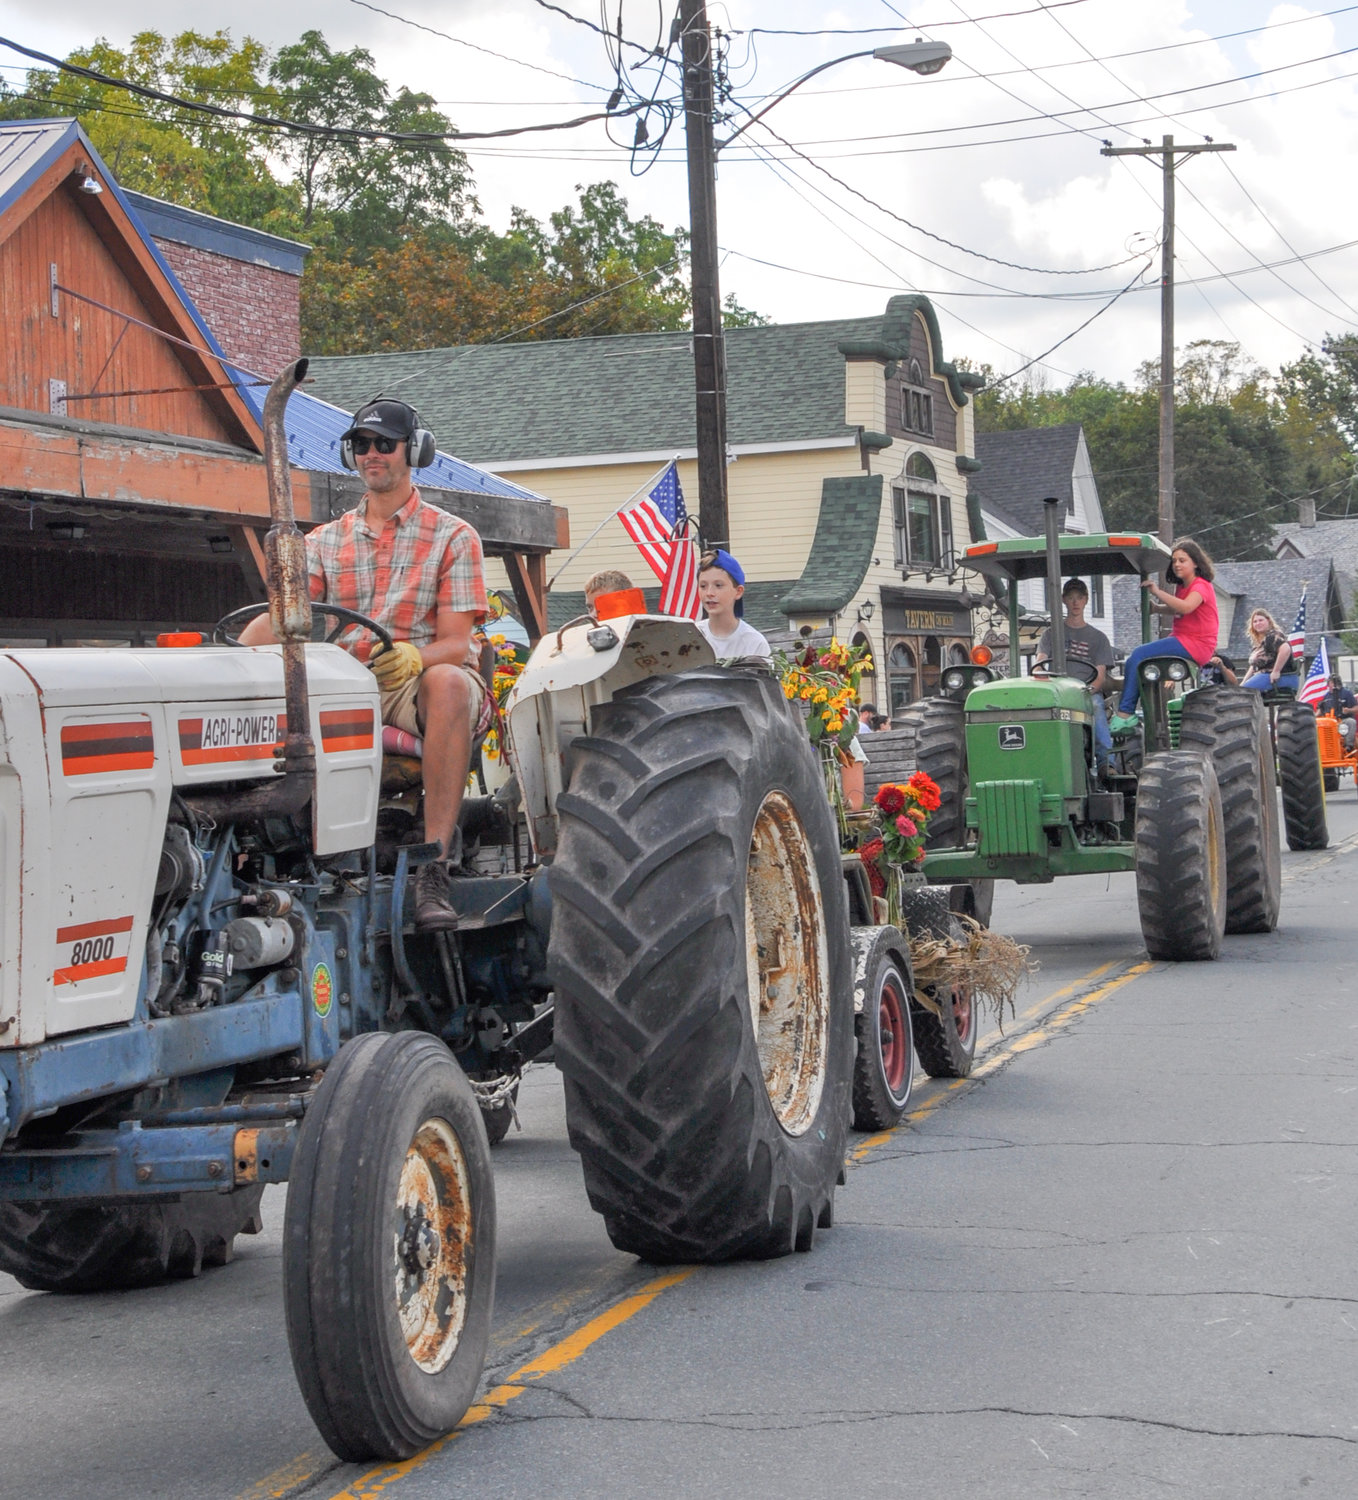 The annual Jeff Jamboree tractor parade snaked its way down Main Street in Jeffersonville, NY last weekend, reminding me that there's no place like home. Or is there?